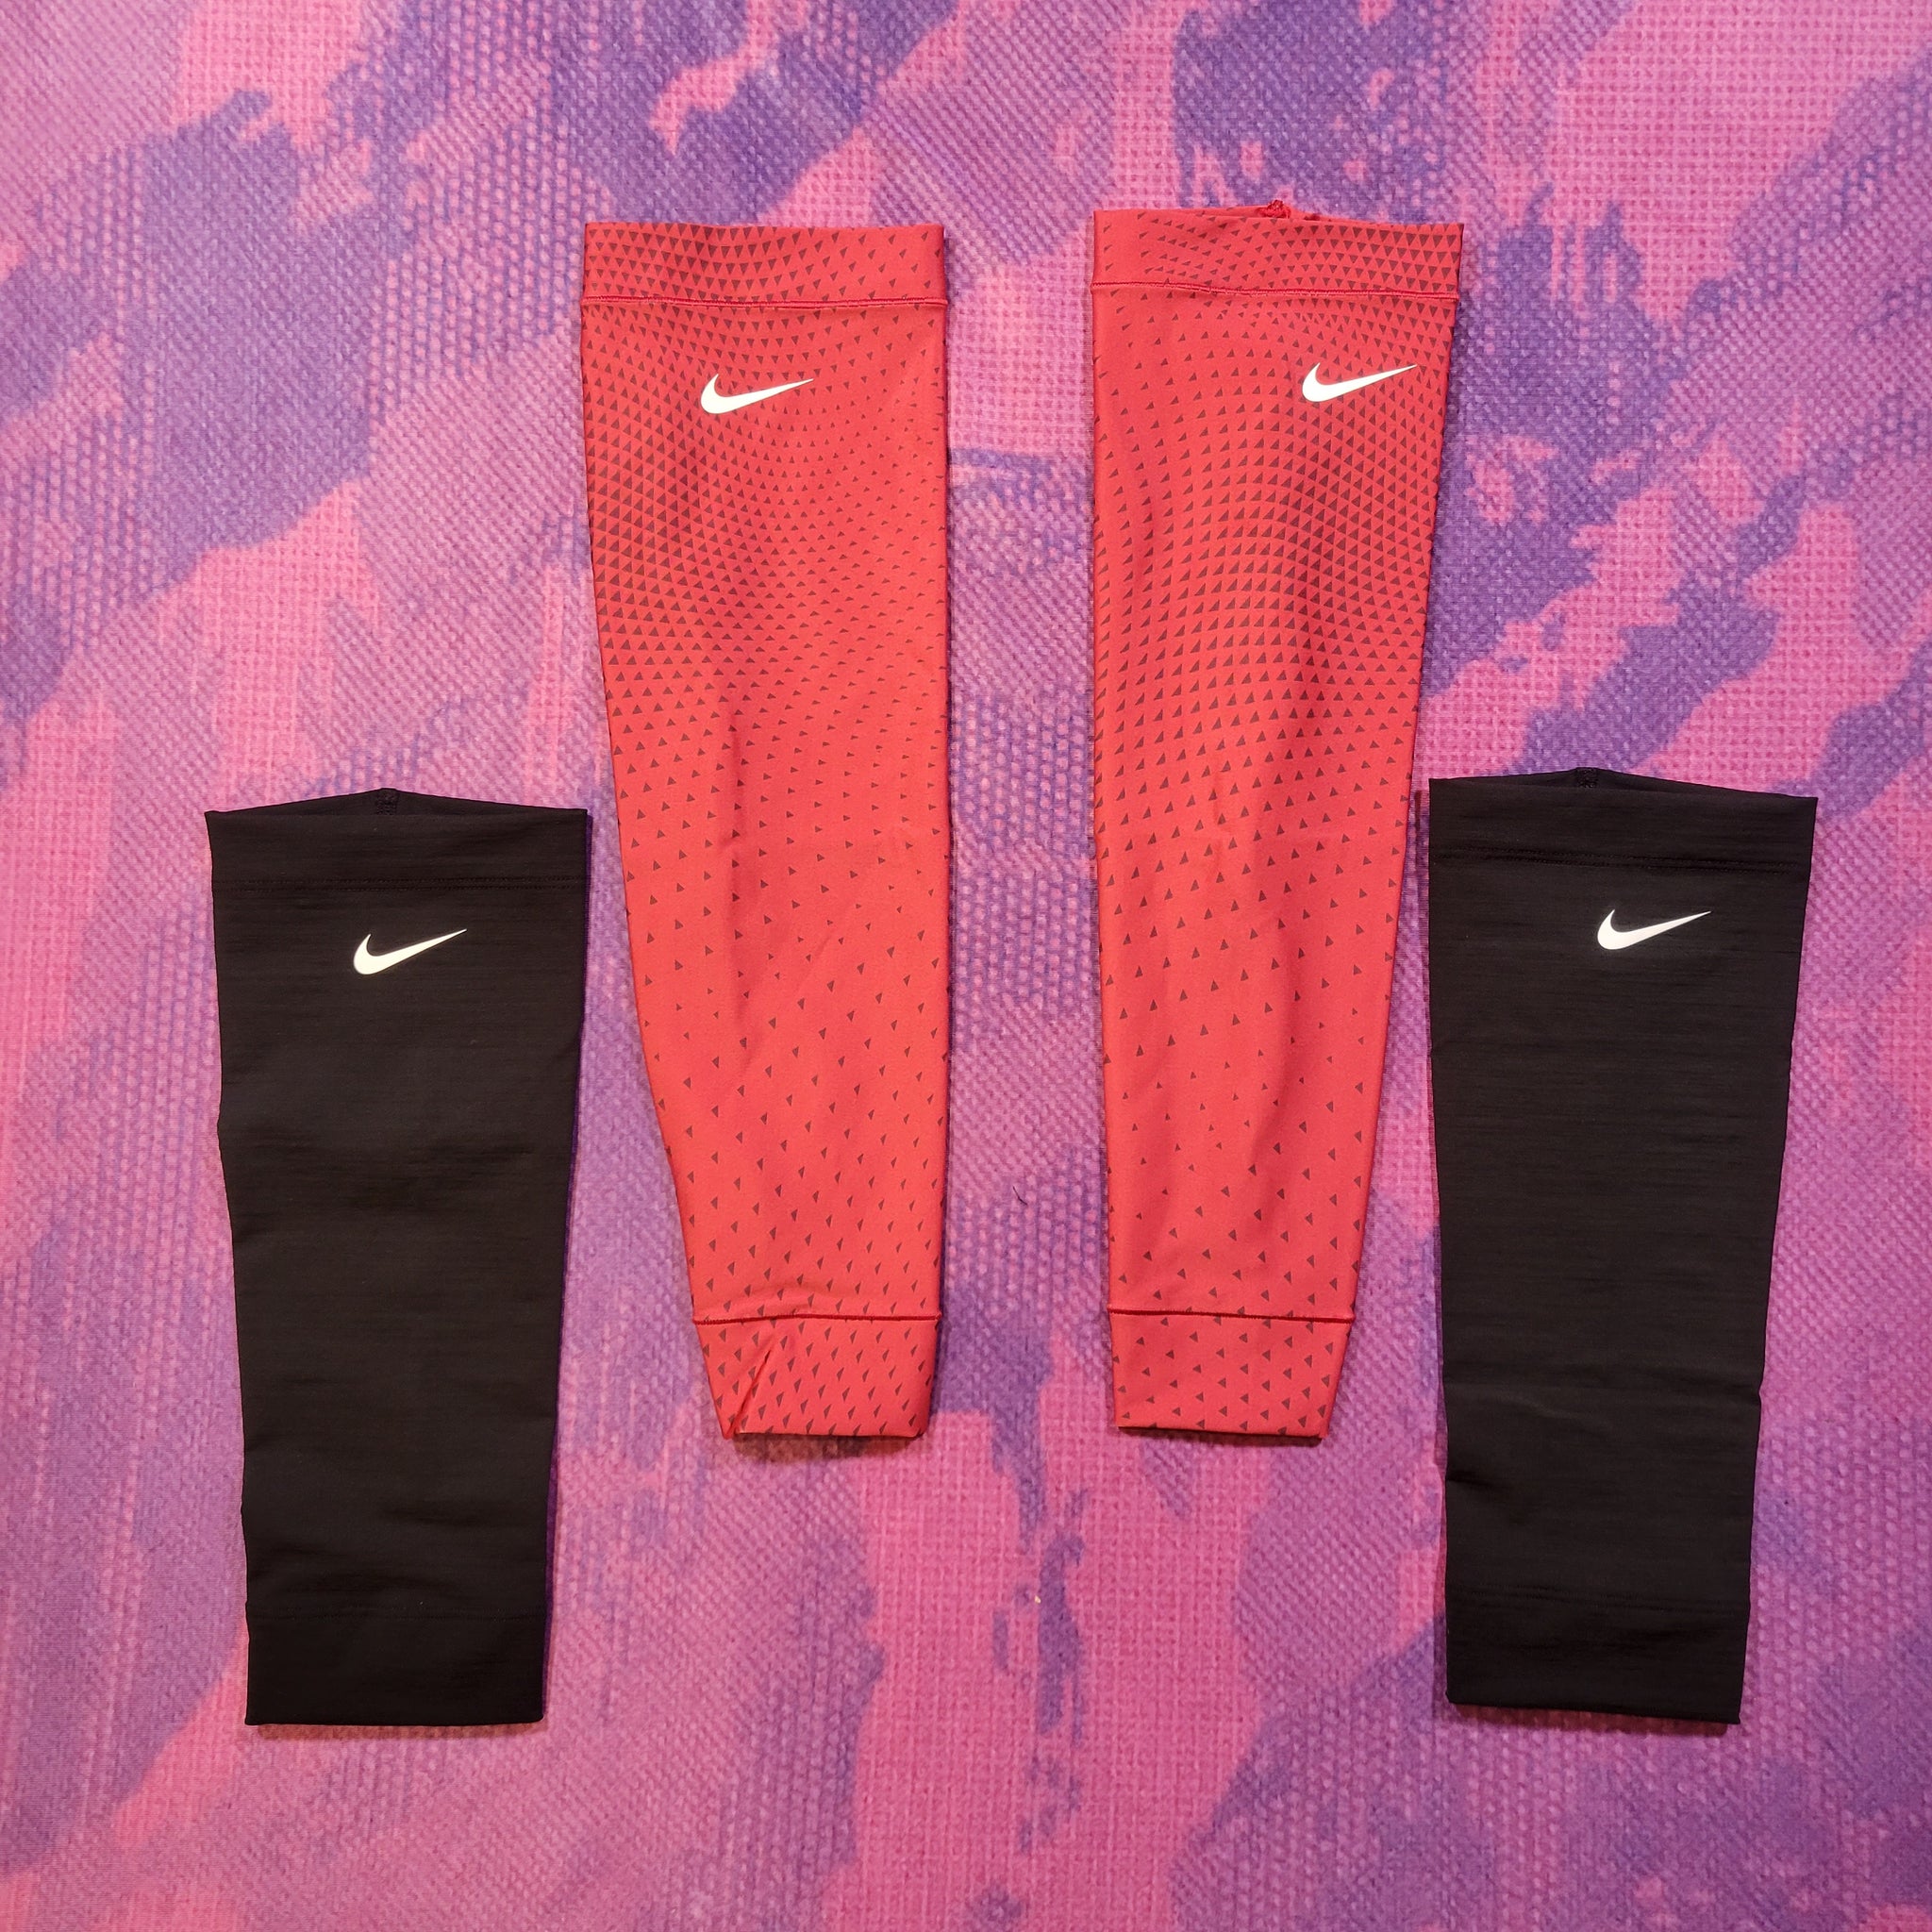 Nike NN Pro Elite collection. Old pictures so the half tights are